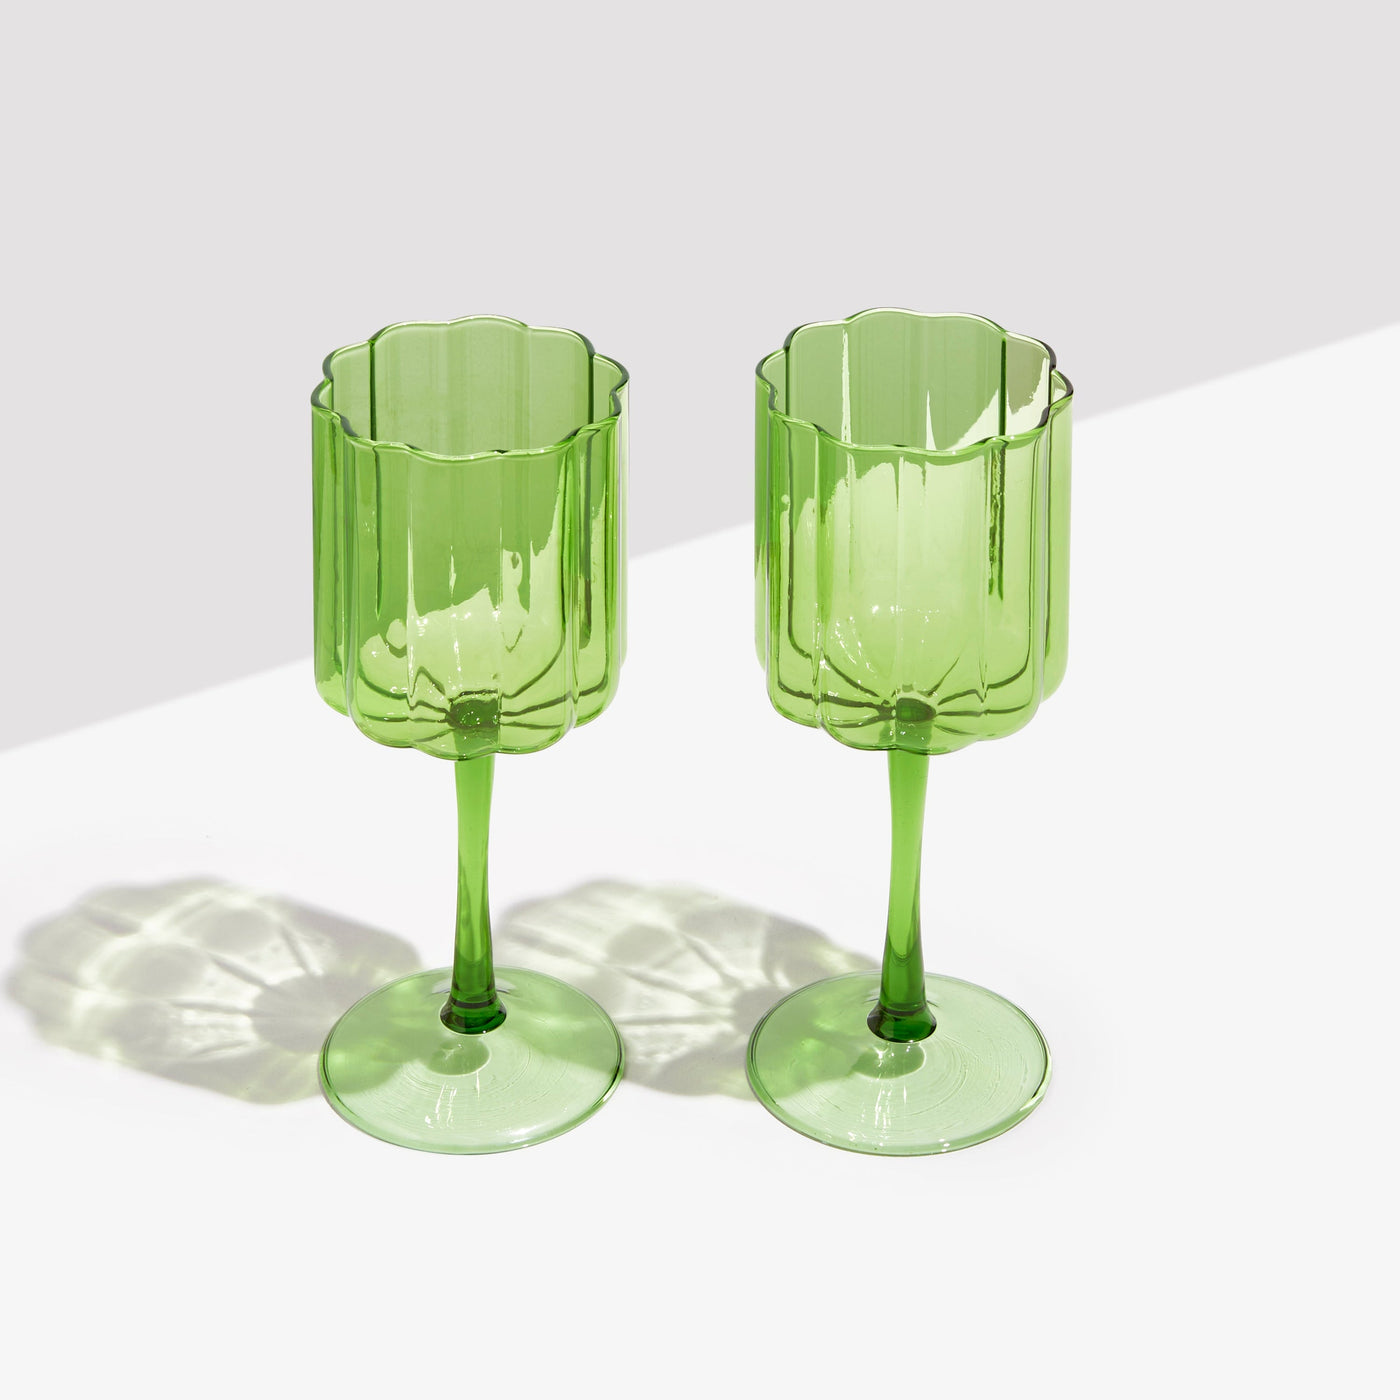 Wave Wine Glass (Various Colors)